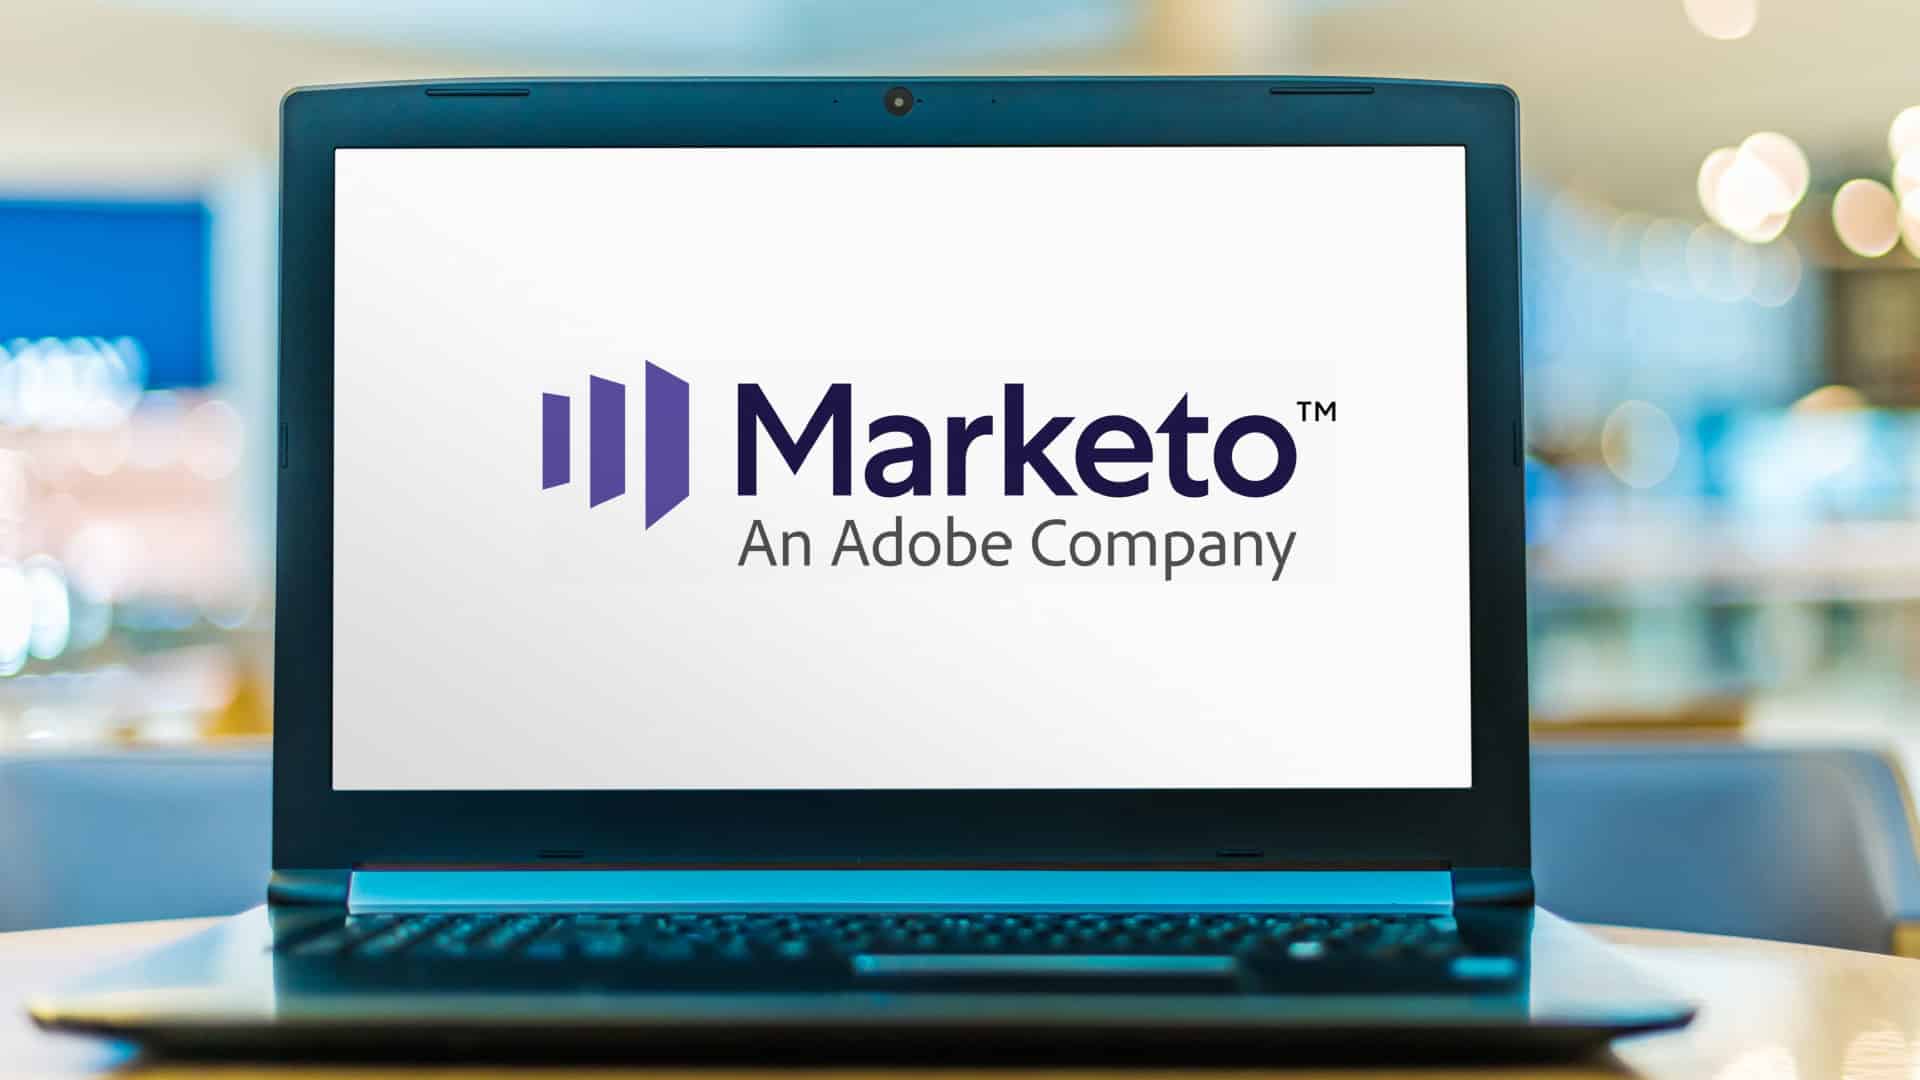 Marketo’s October releases: A manager’s guide